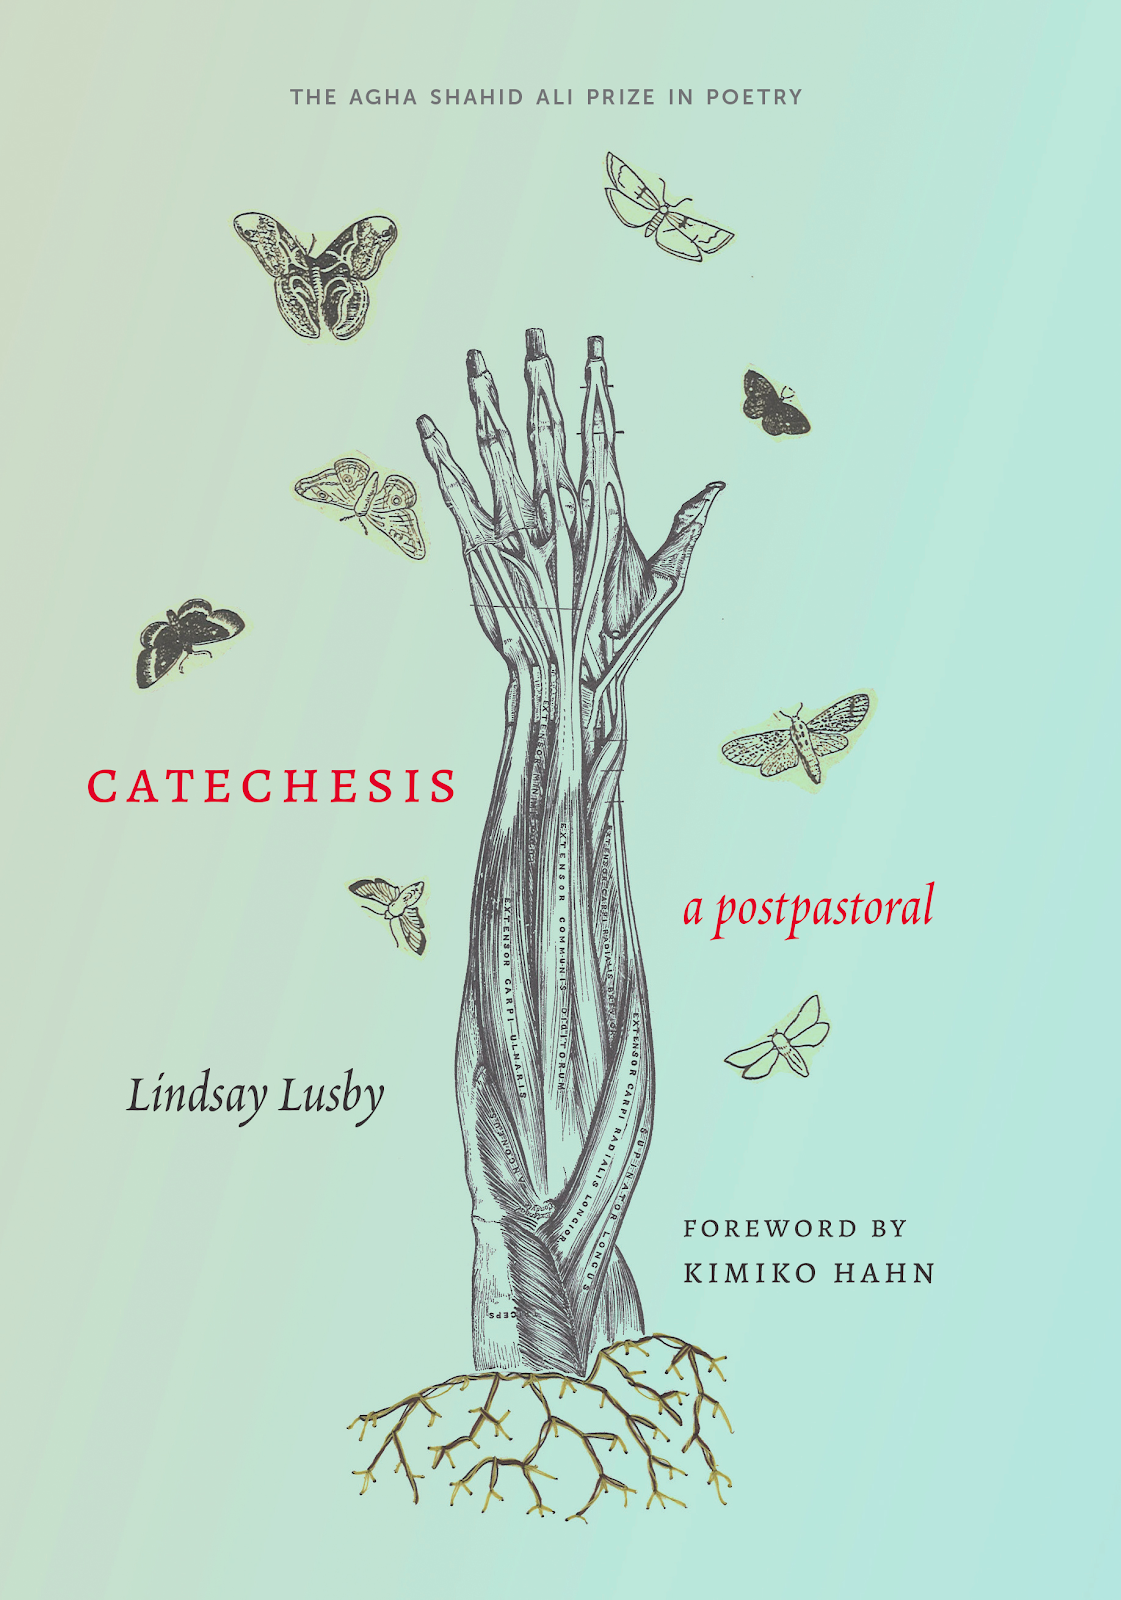 Cover of "Catechesis" by Lindsay Lusby: an anatomical drawing of the muscles of a hand and forearm, surrounded by butterflies.